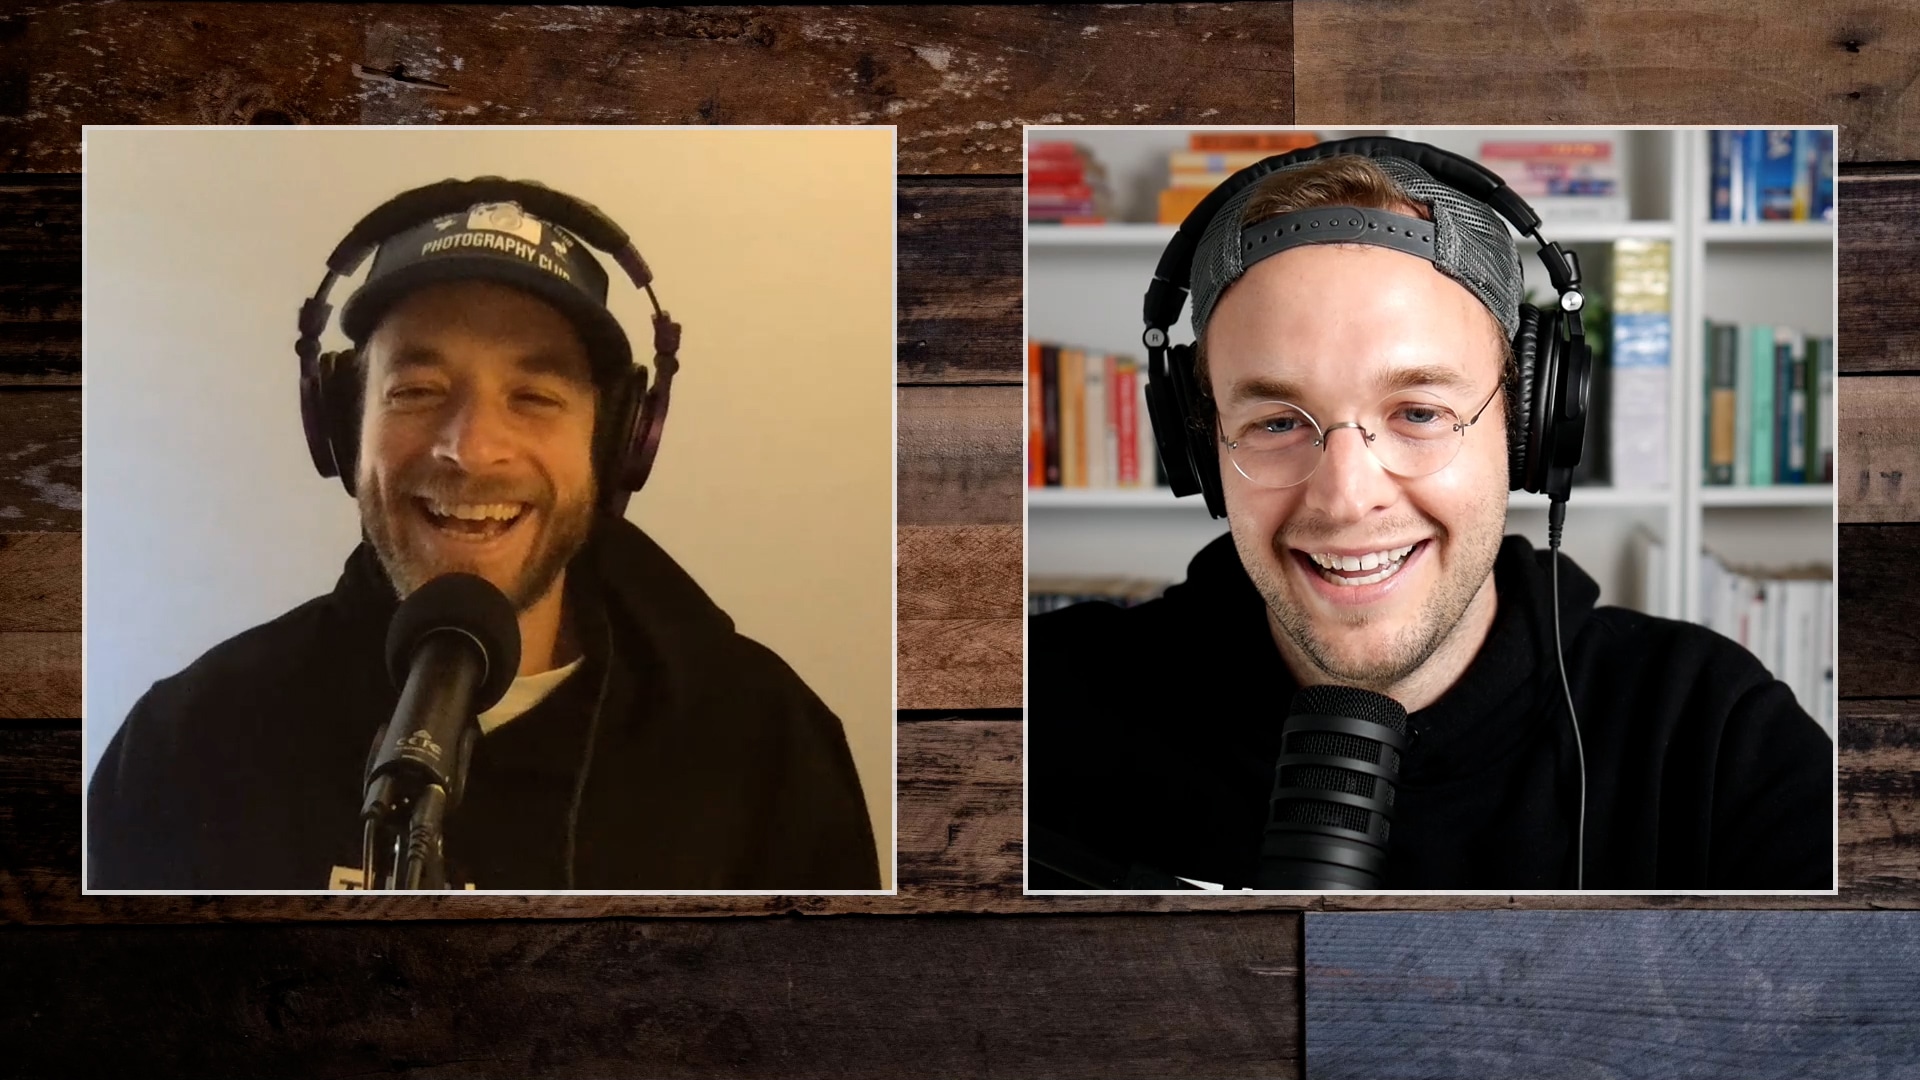 884 - Hamish Blake Co-Hosts The Podcast - The Daily Talk Show